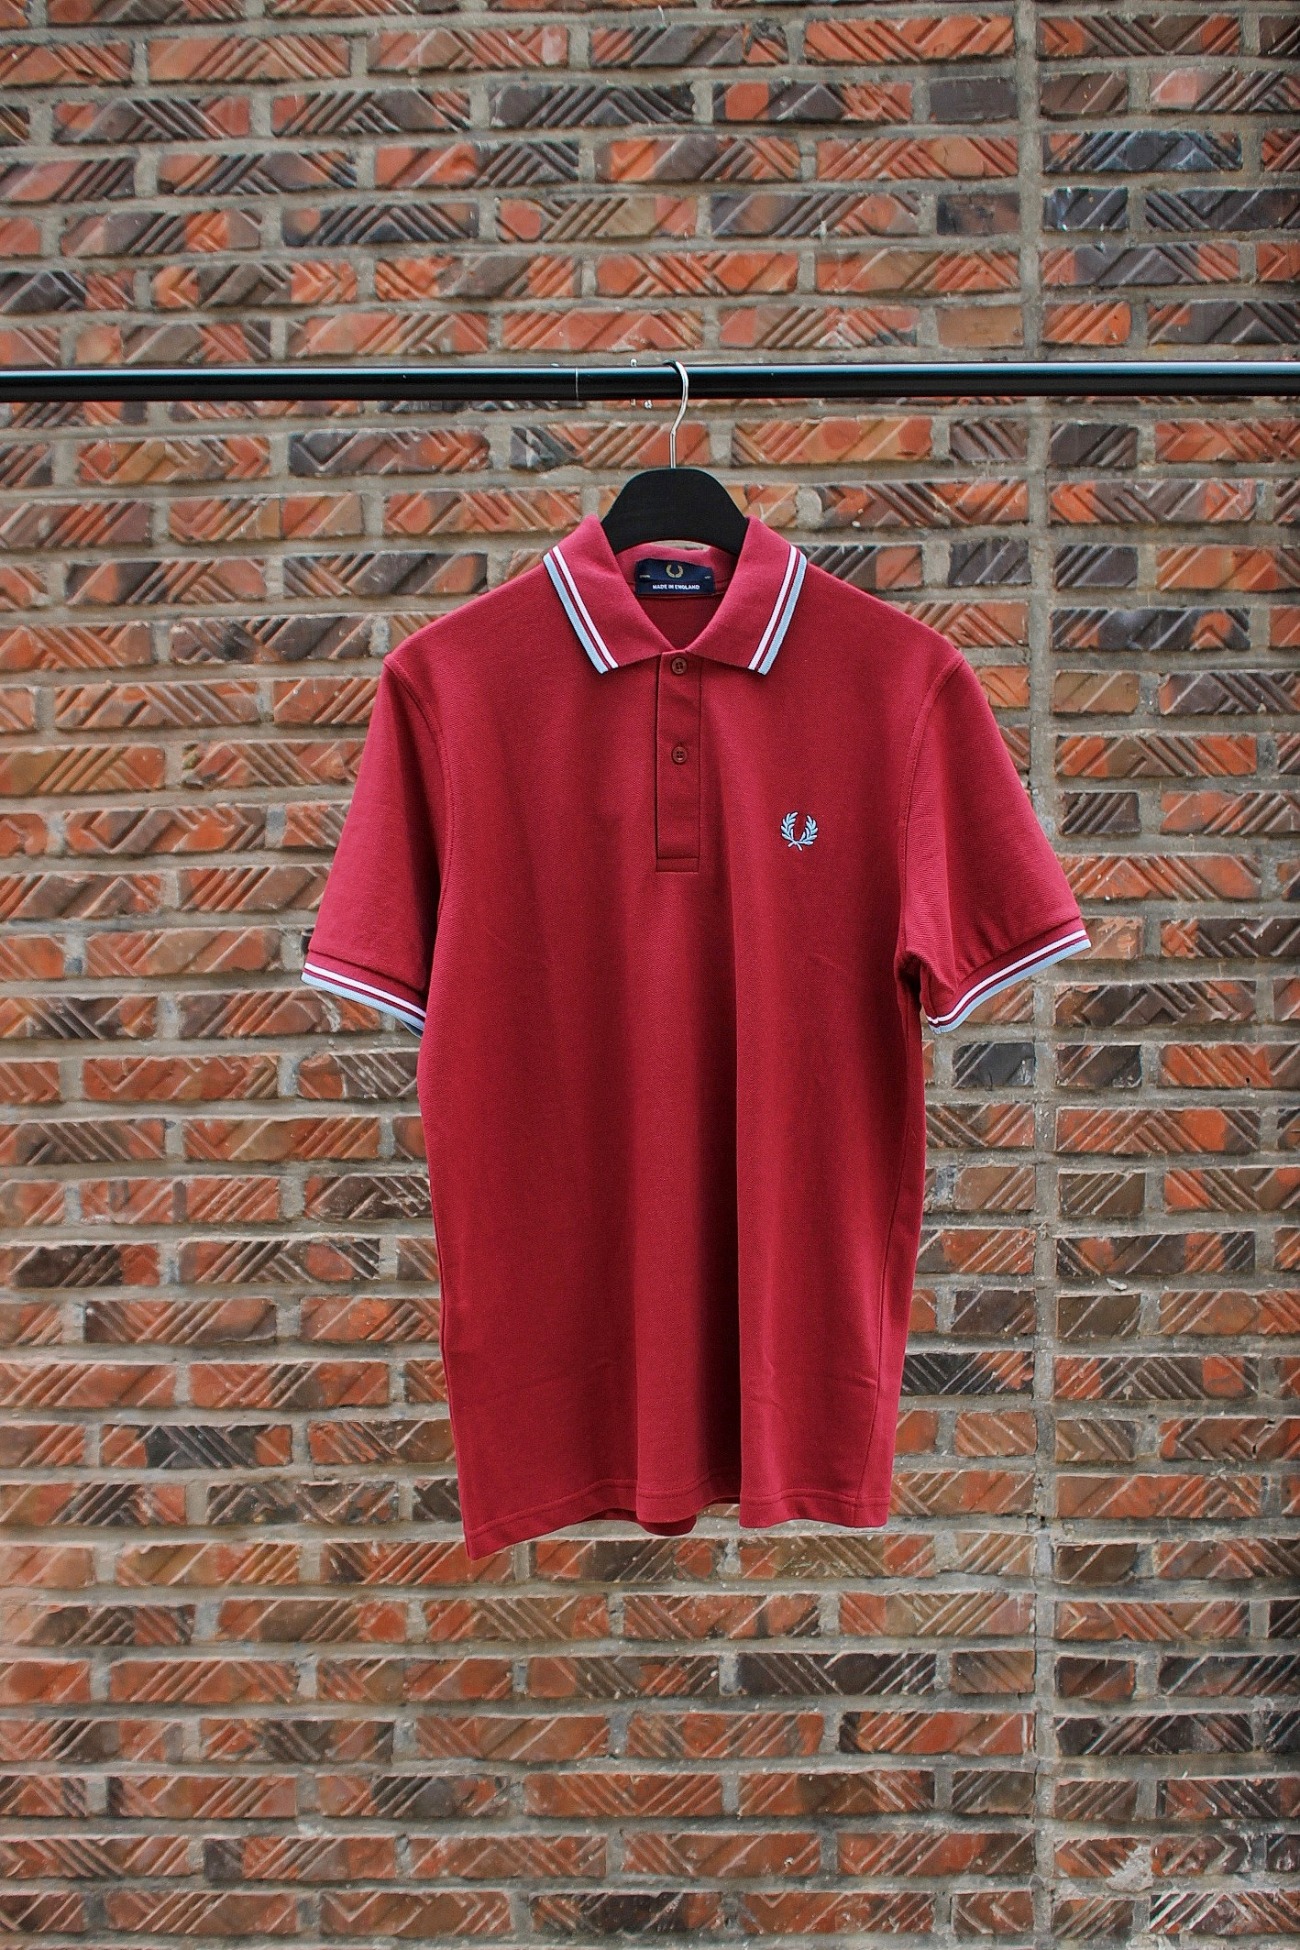 [FRED PERRY] Twin Tipped Fred Perry Shirt (Re-Issues) - Maroon